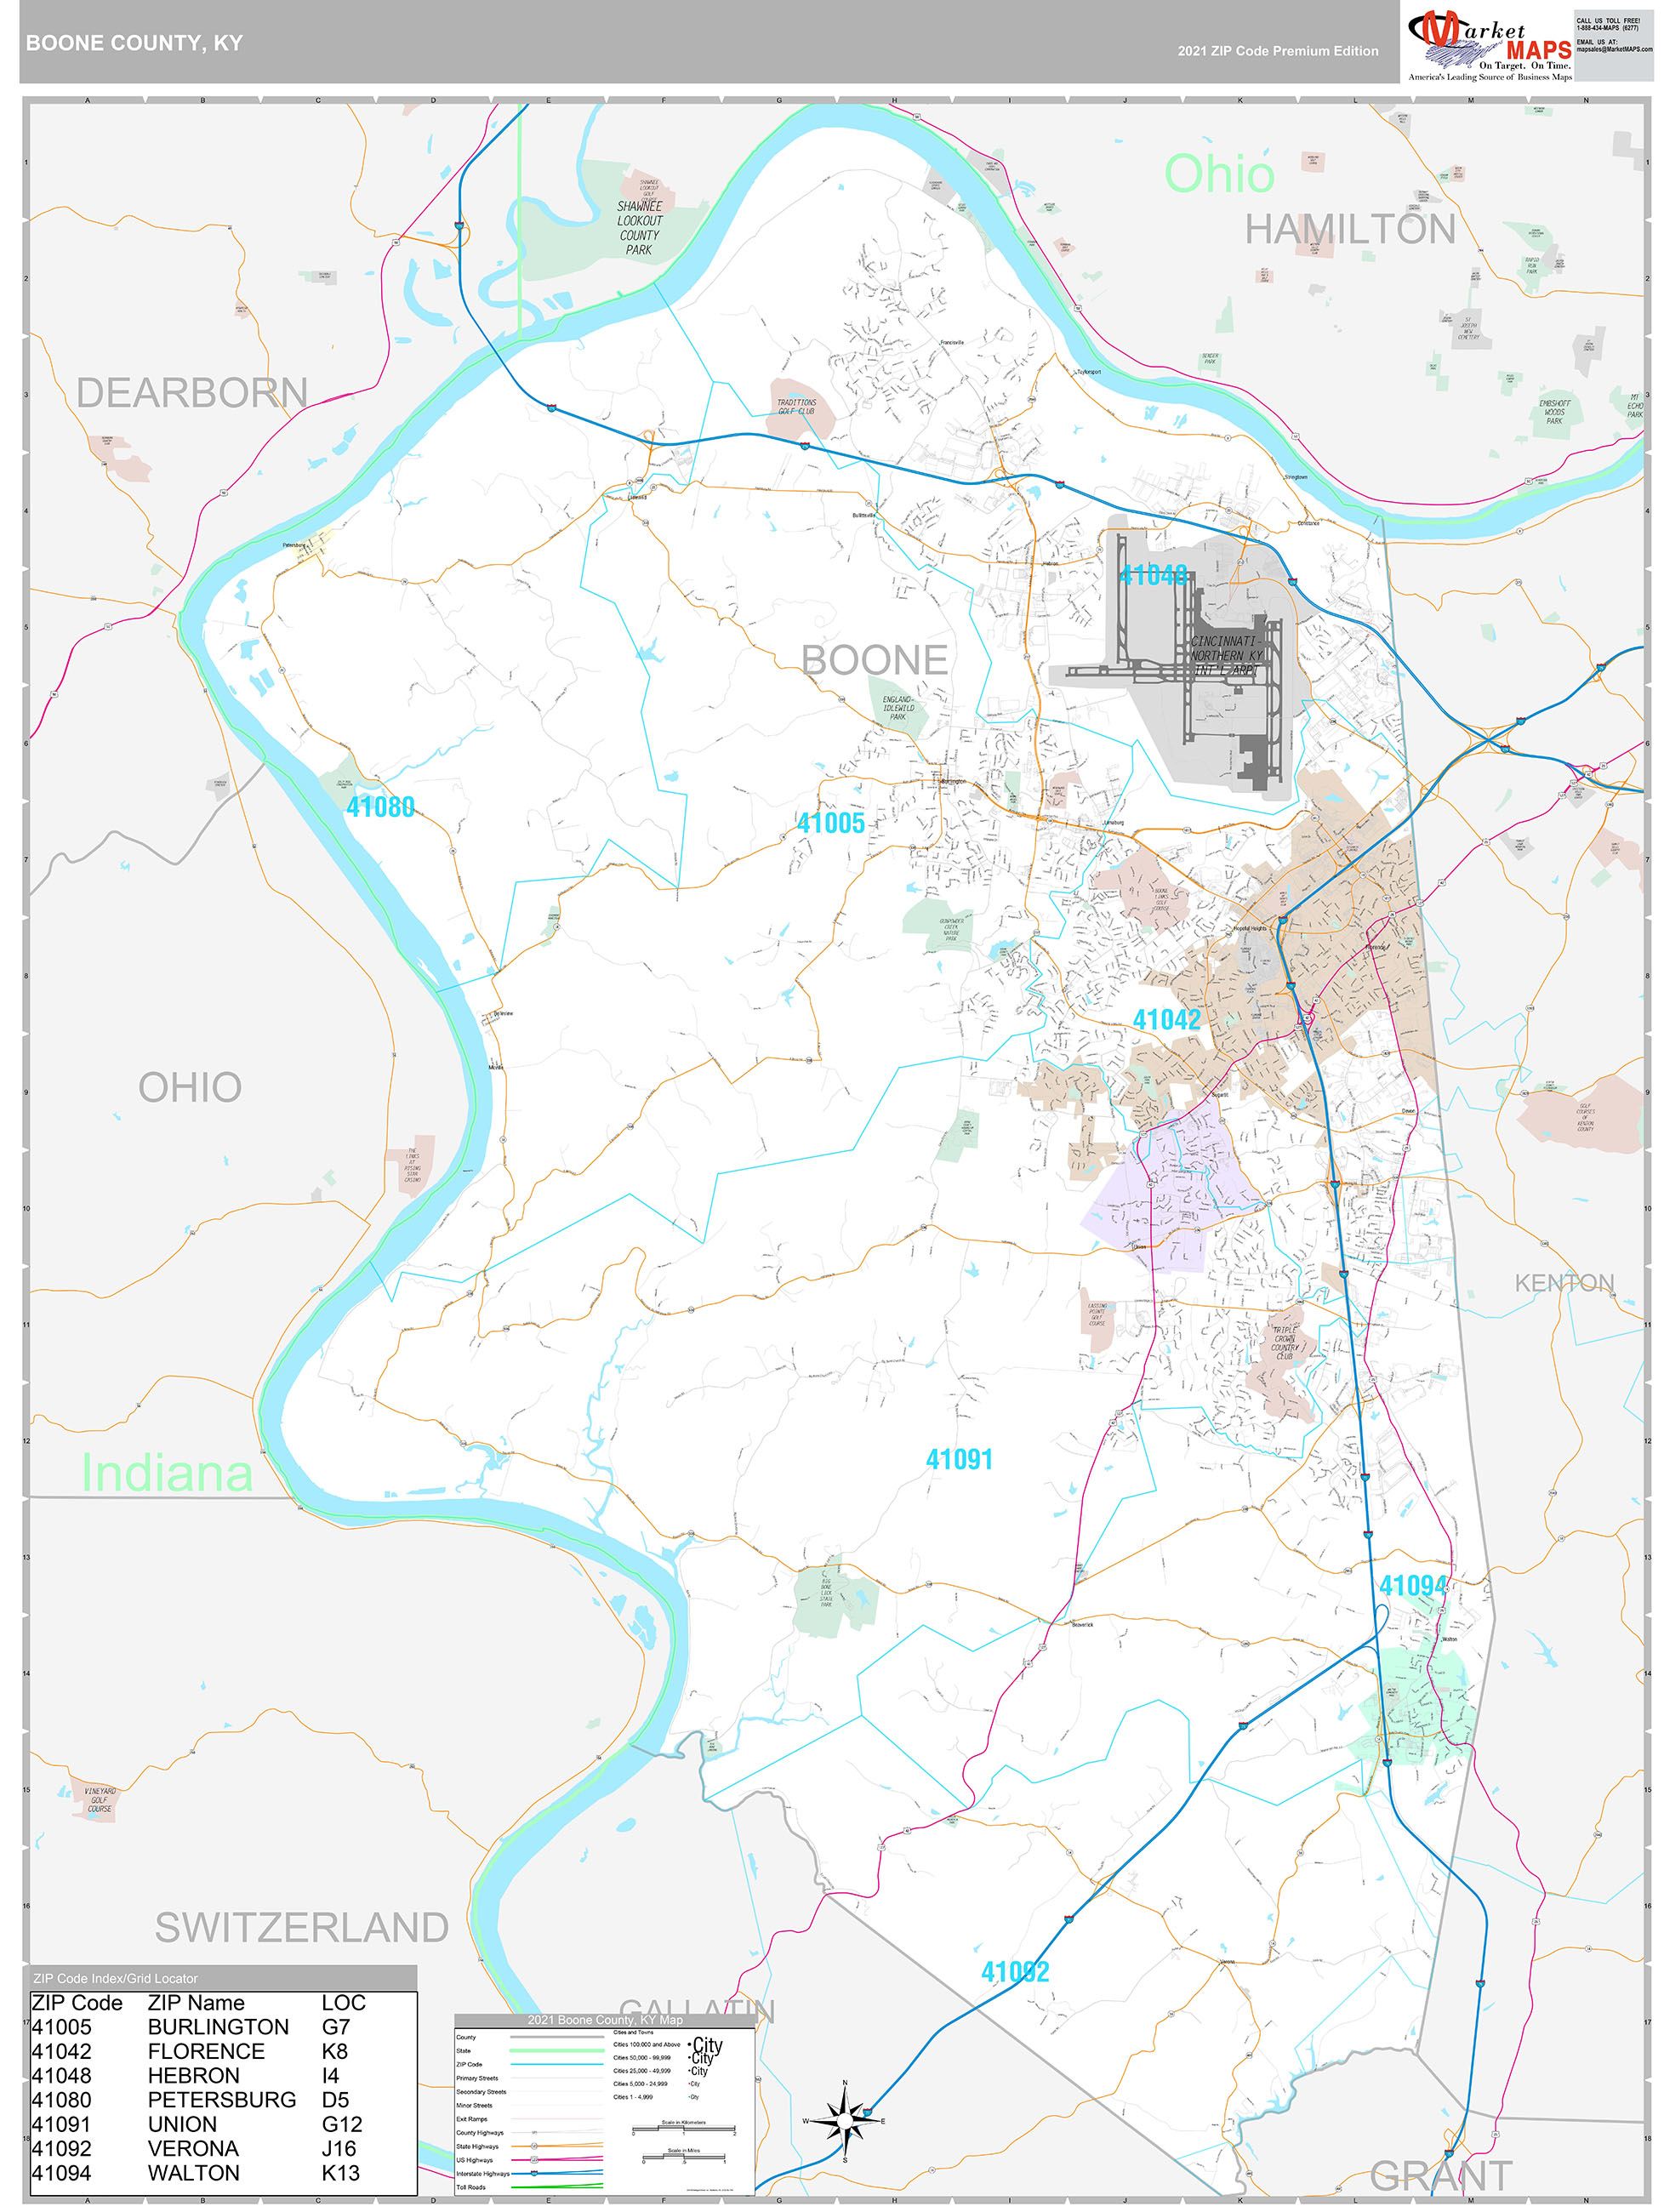 Boone County, KY Wall Map Premium Style by MarketMAPS - MapSales